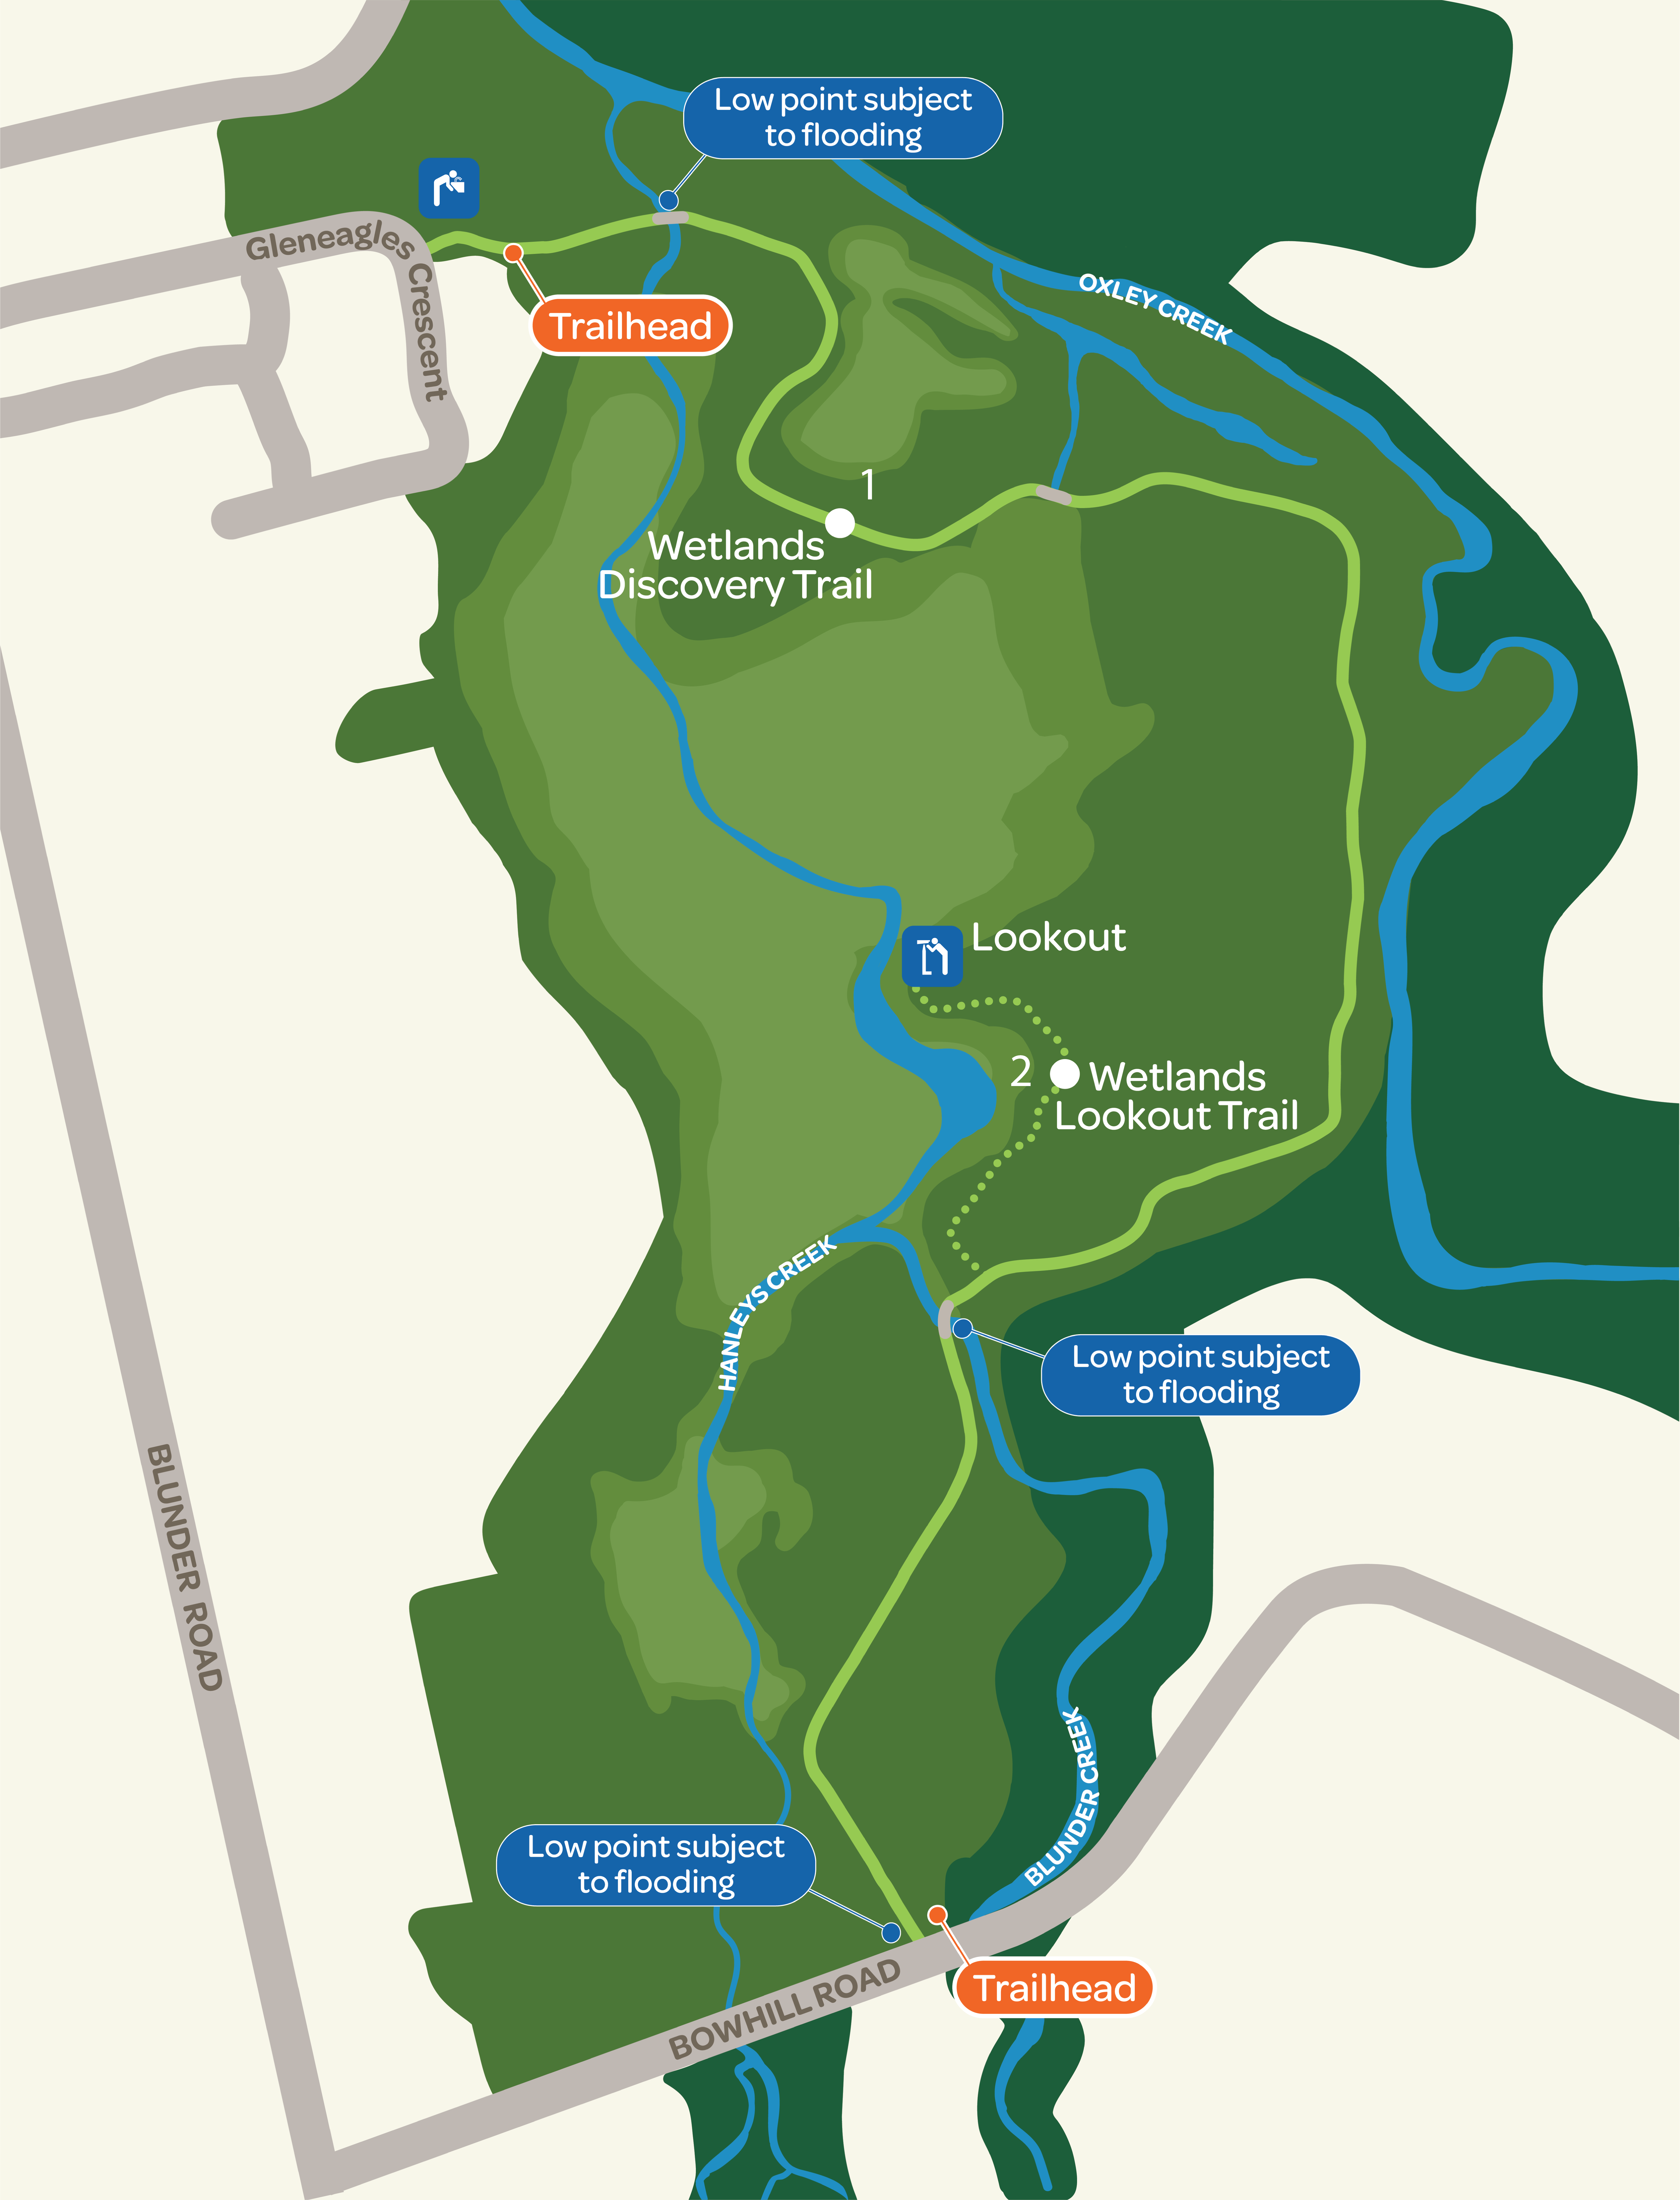 This image is a map of the Archerfield Wetlands Parkland, showing the route of the Wetlands Discovery Trail through the parkland, including the route of the Wetlands Lookout Trail, which is accessed from the Discovery Trail. 

The two entry points to the Discovery Trail are identified on the map as Trailheads. The northern Trailhead, at the top of the map, is accessed via Gleneagles Crescent Park, Oxley. The southern Trailhead, at the bottom of the map, is accessed via Bowhill Road, Durack. The map also identifies the location of three low points along the trail that are subject to flooding, as well as the location of a flood refuge area in the southeast corner of the parkland.